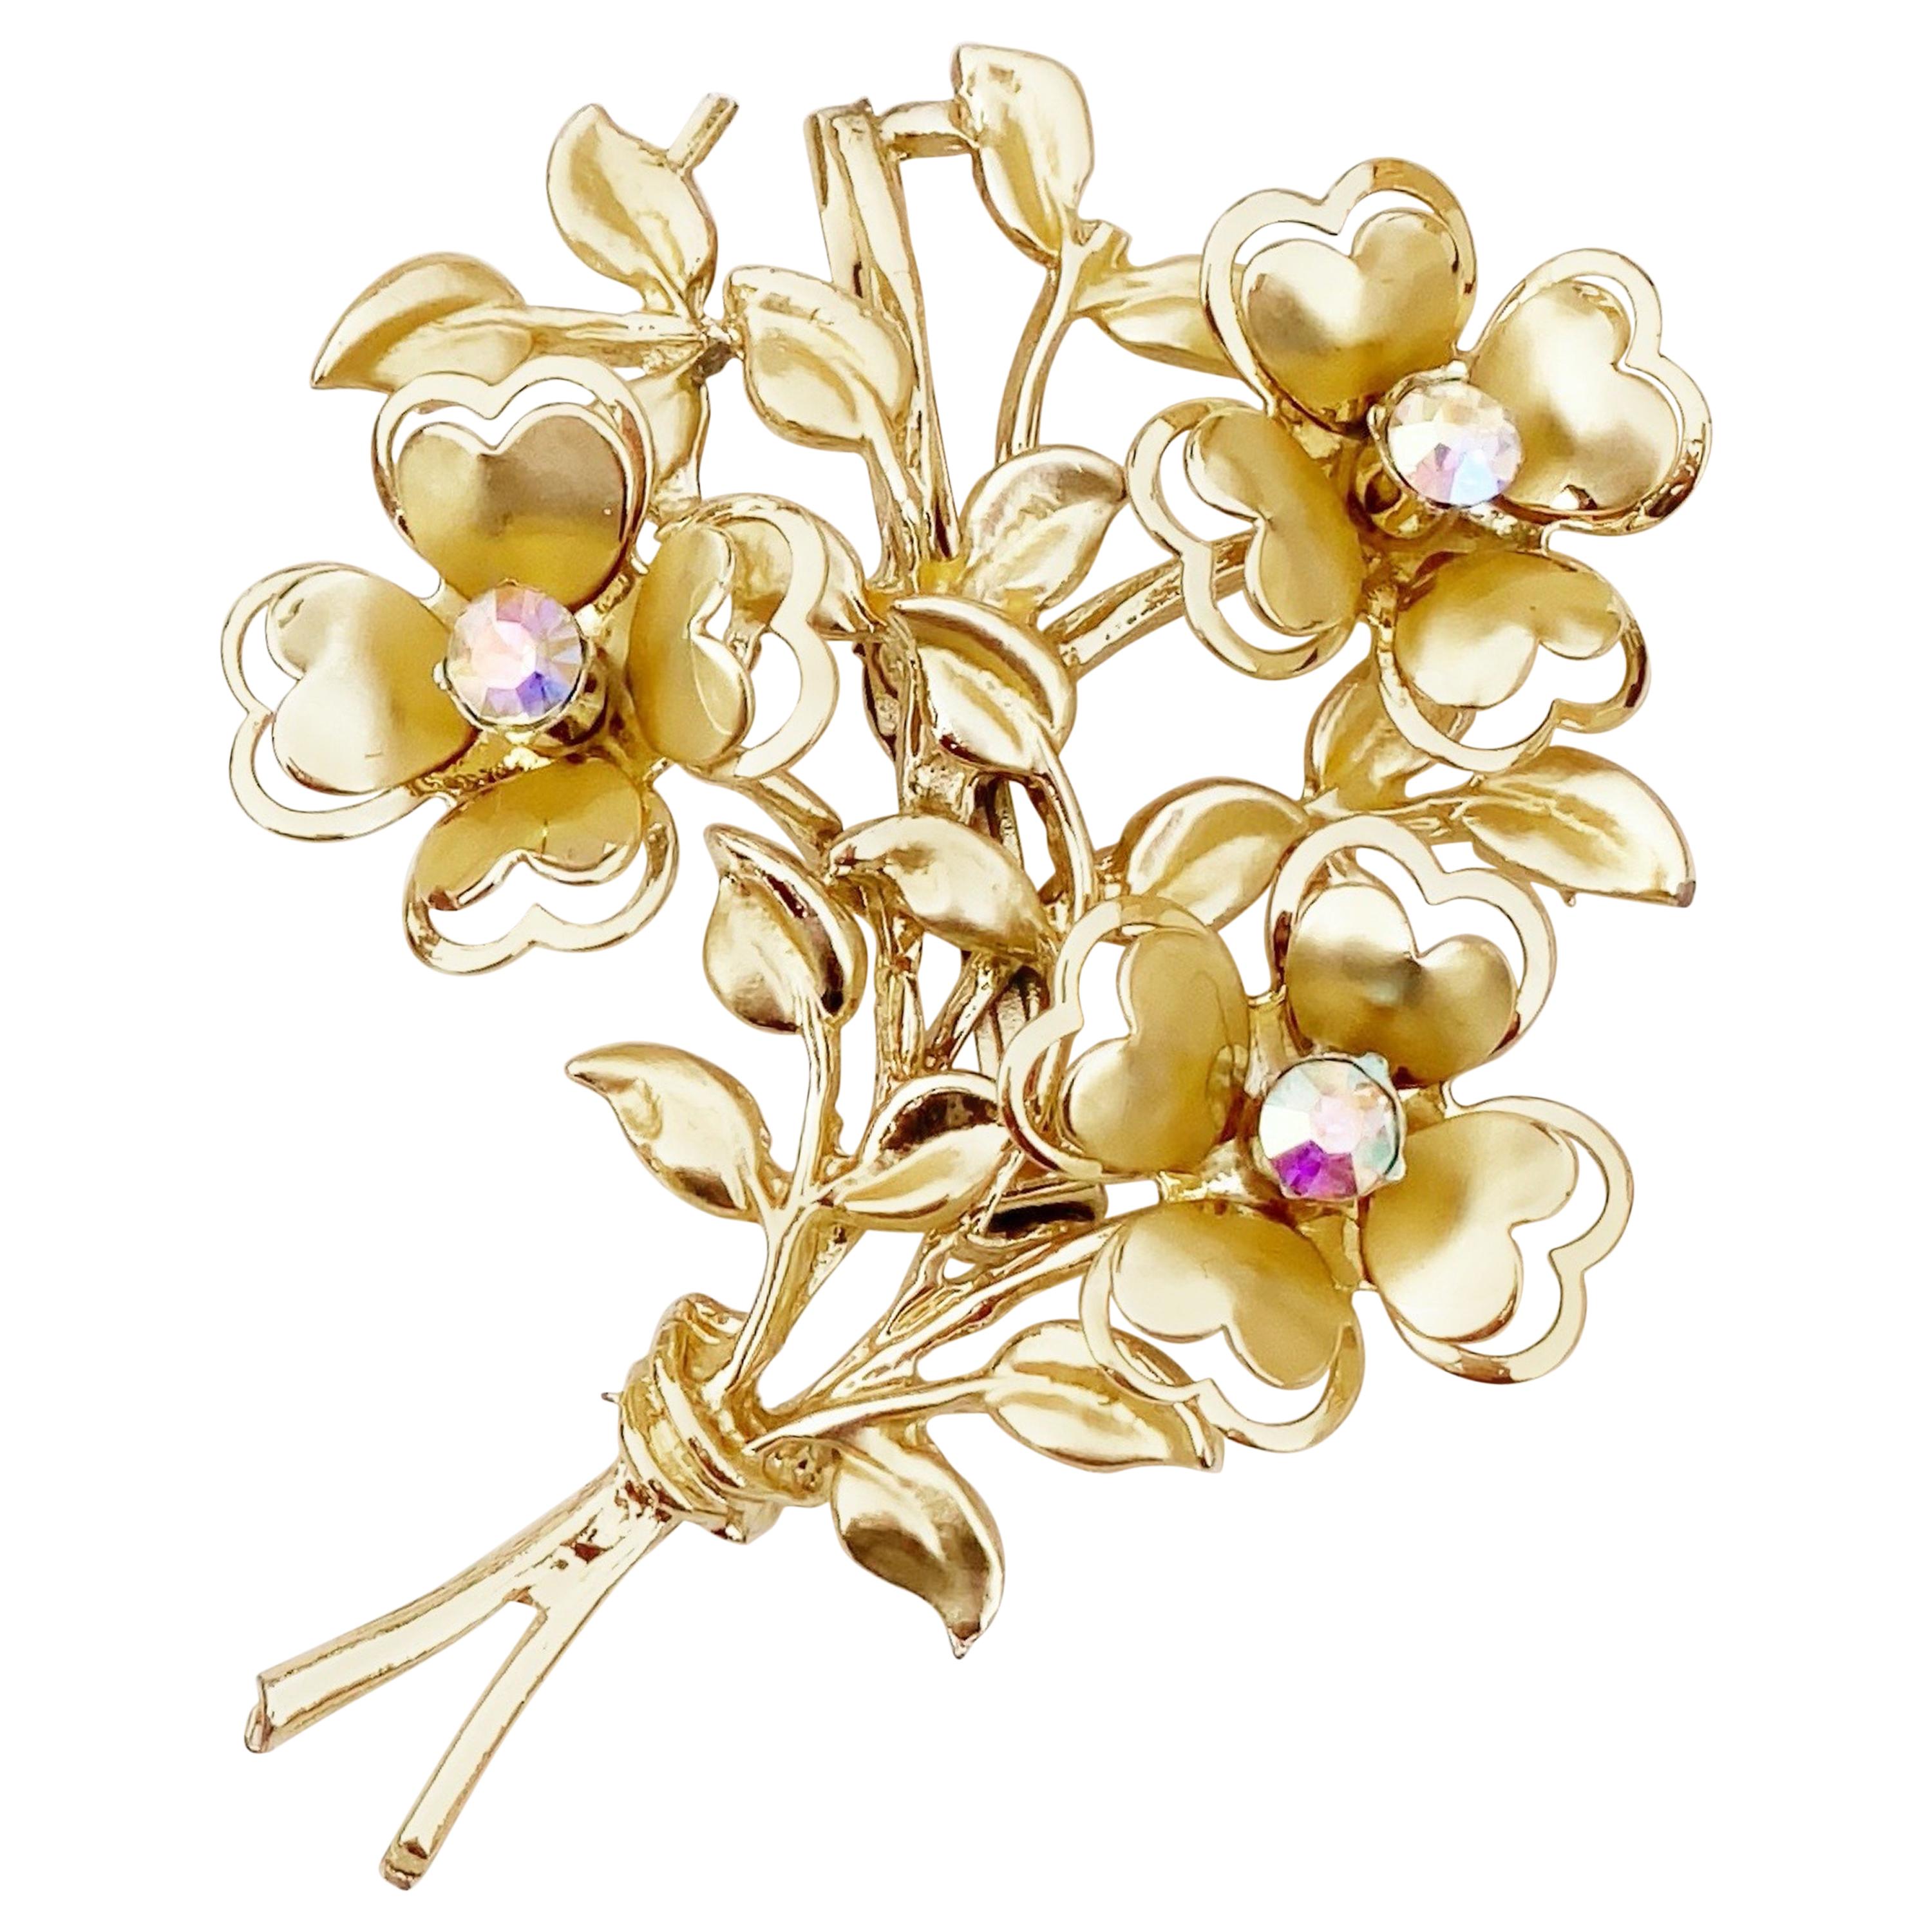 Red Orchid Rhinestone Aurora Borealis Gold Tone Brooch Victorian Style Costume Jewelry Flower Pin